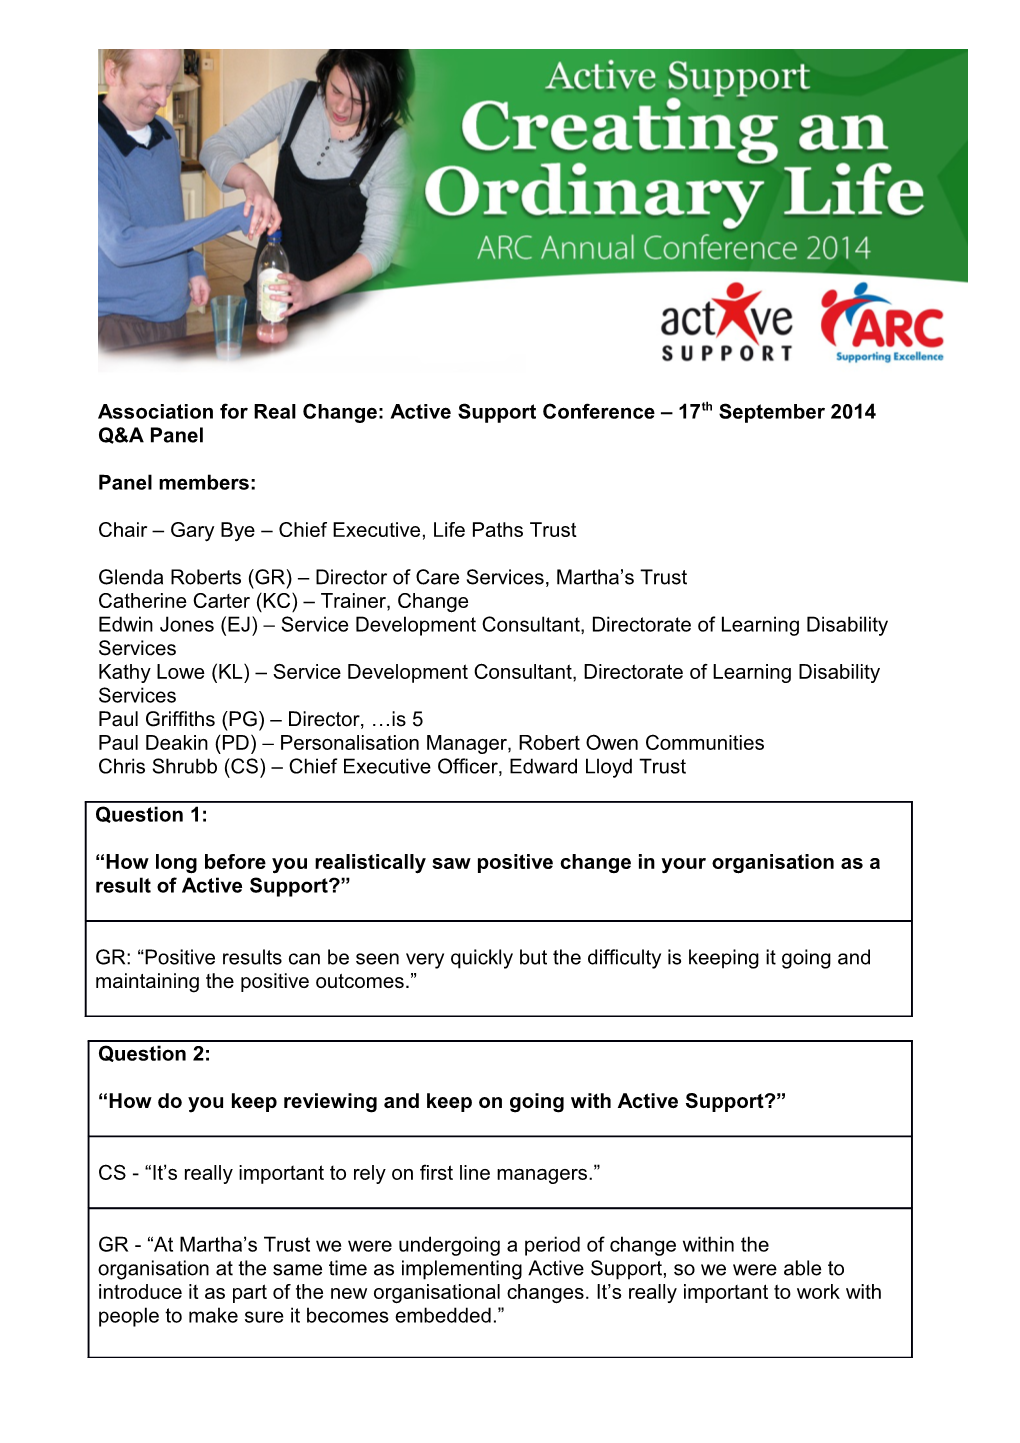 Association for Real Change: Active Support Conference 17Th September 2014